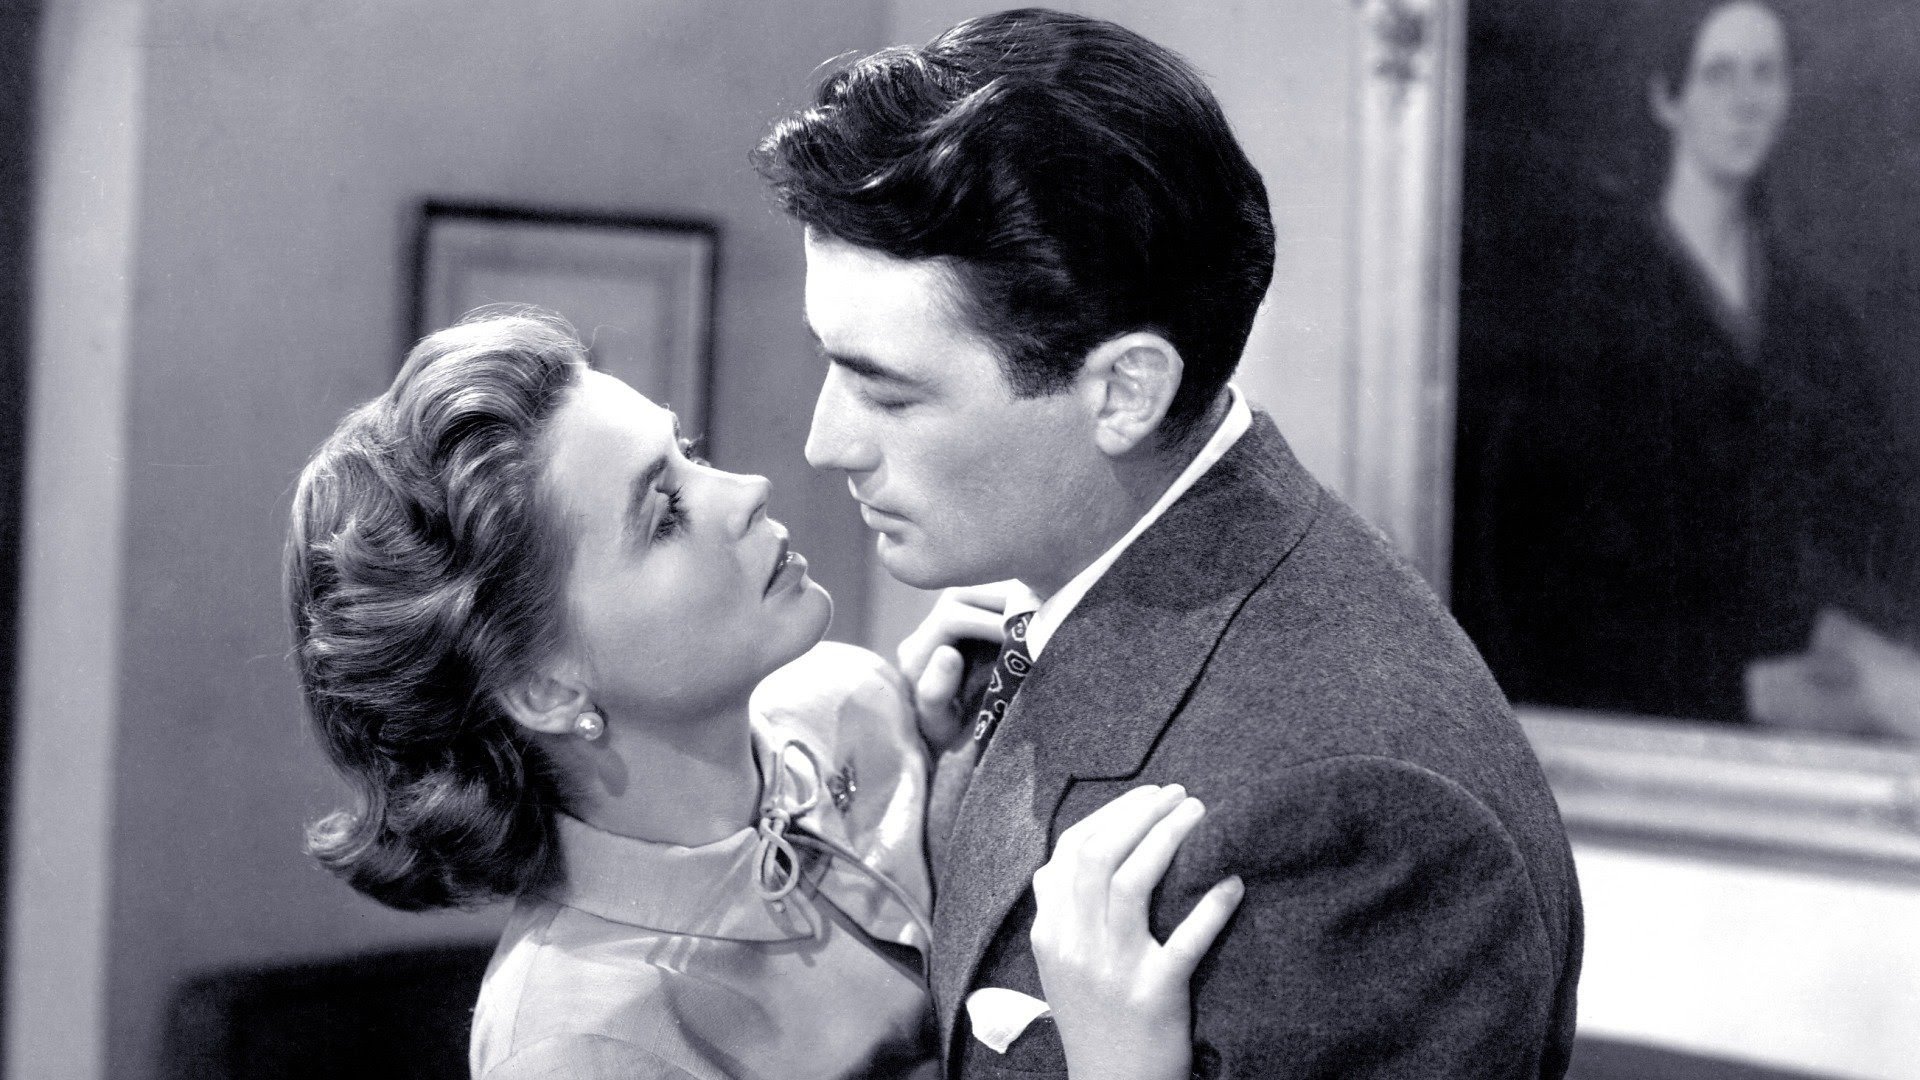 GENTLEMAN'S AGREEMENT film still of Gregory Peck and Dorothy McGuire